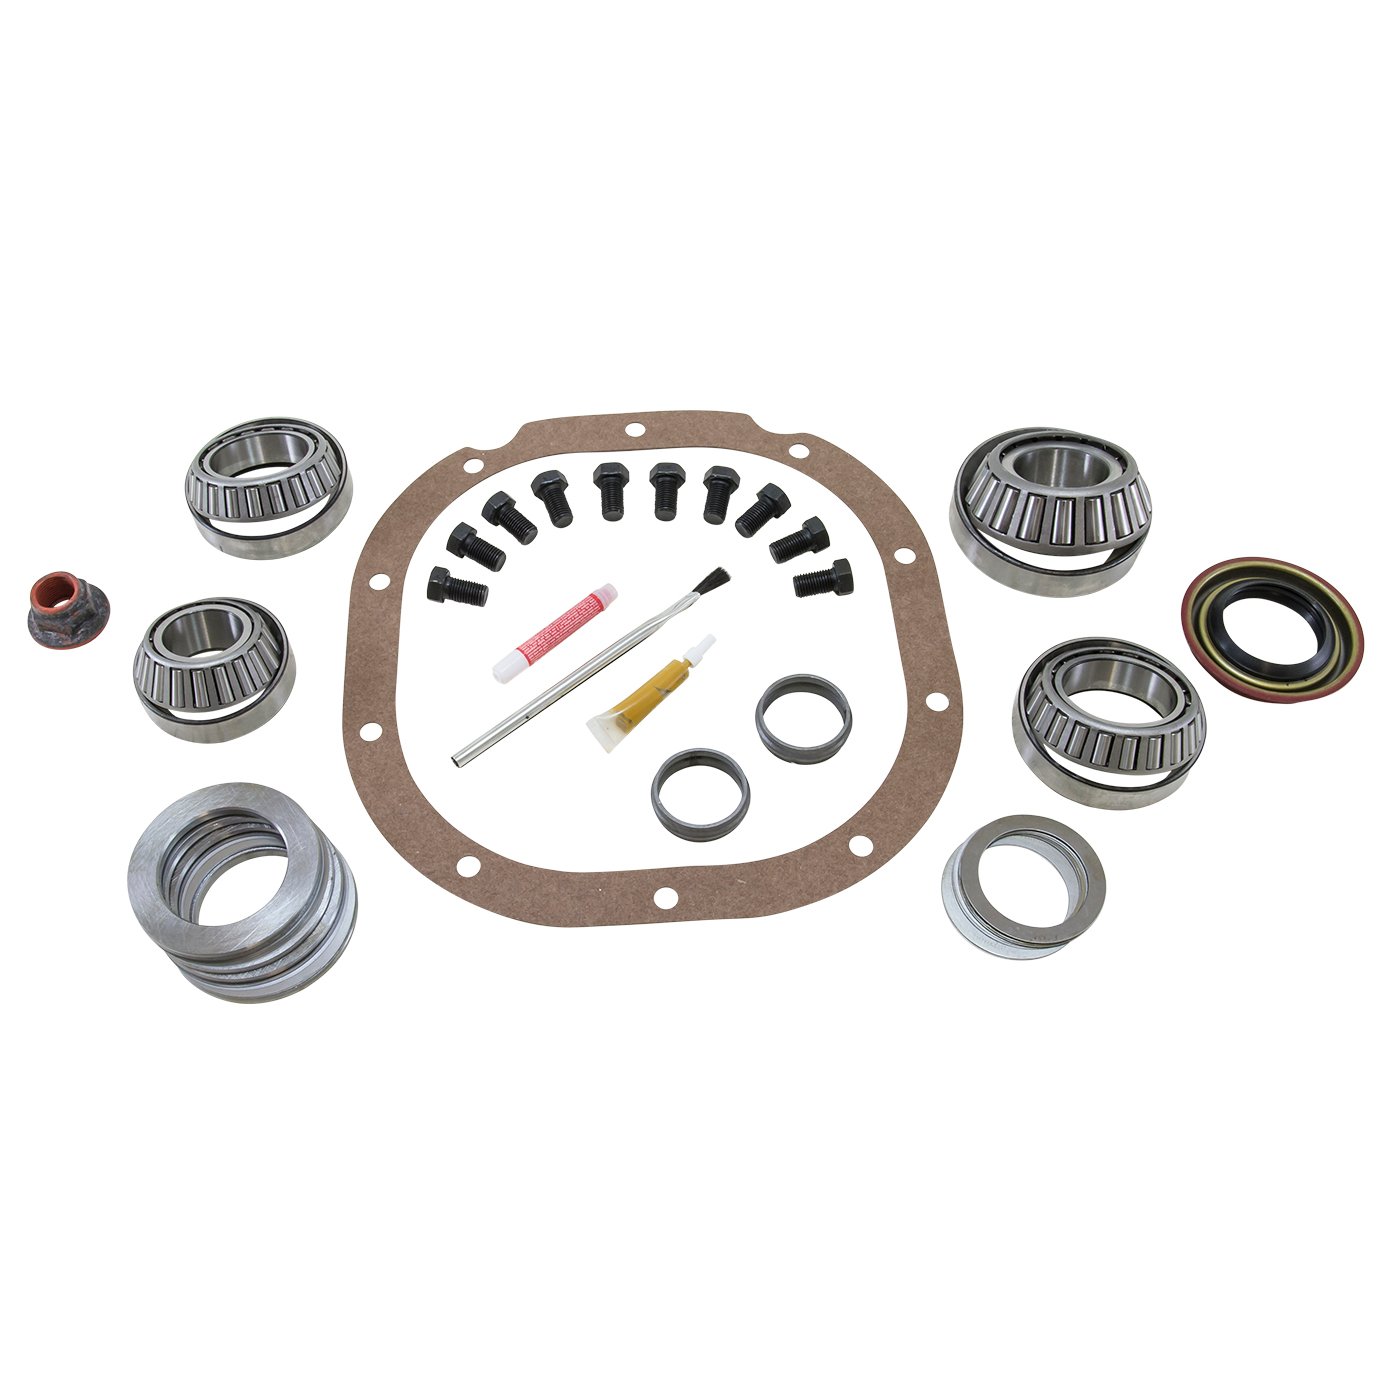 USA Standard 37153 Master Overhaul Kit, For 2015 & Up Mustang And F-150